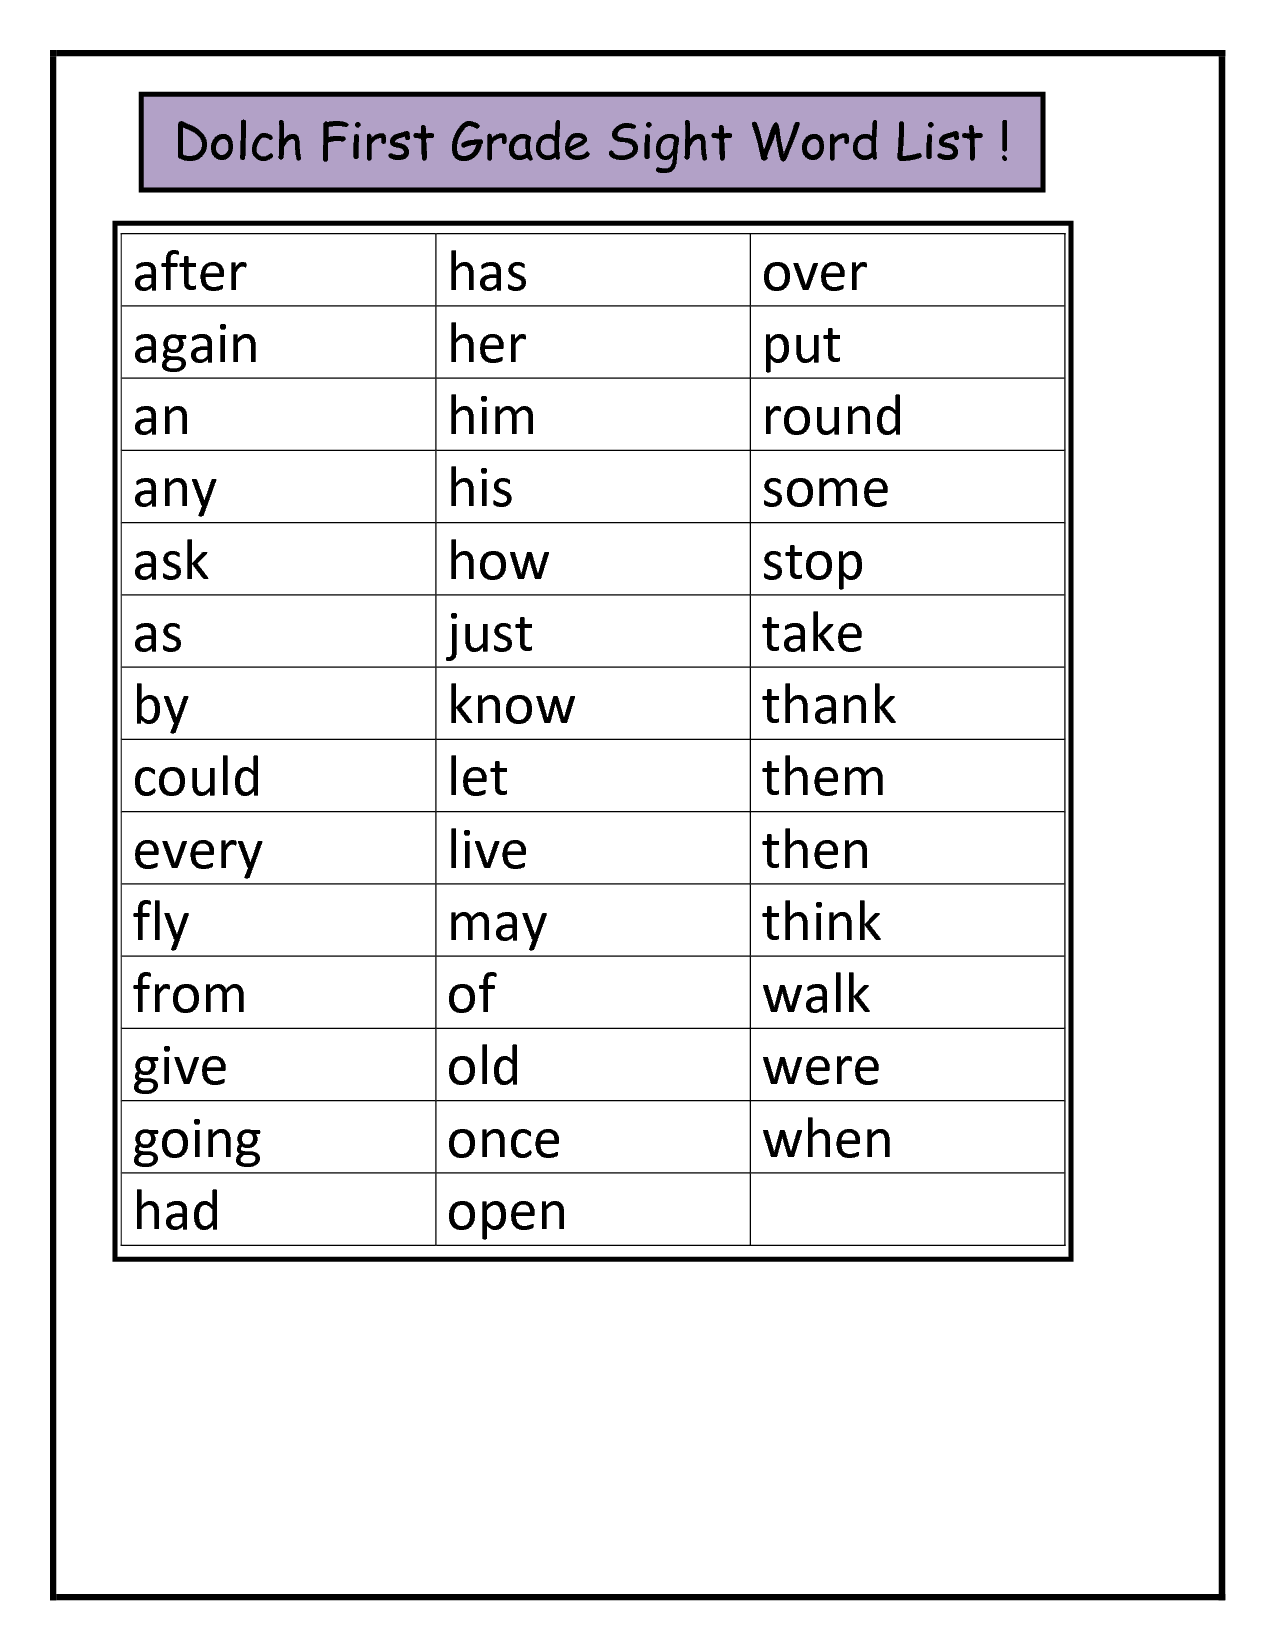 6-best-images-of-printable-sight-words-dolch-lists-free-dolch-sight-words-list-printables